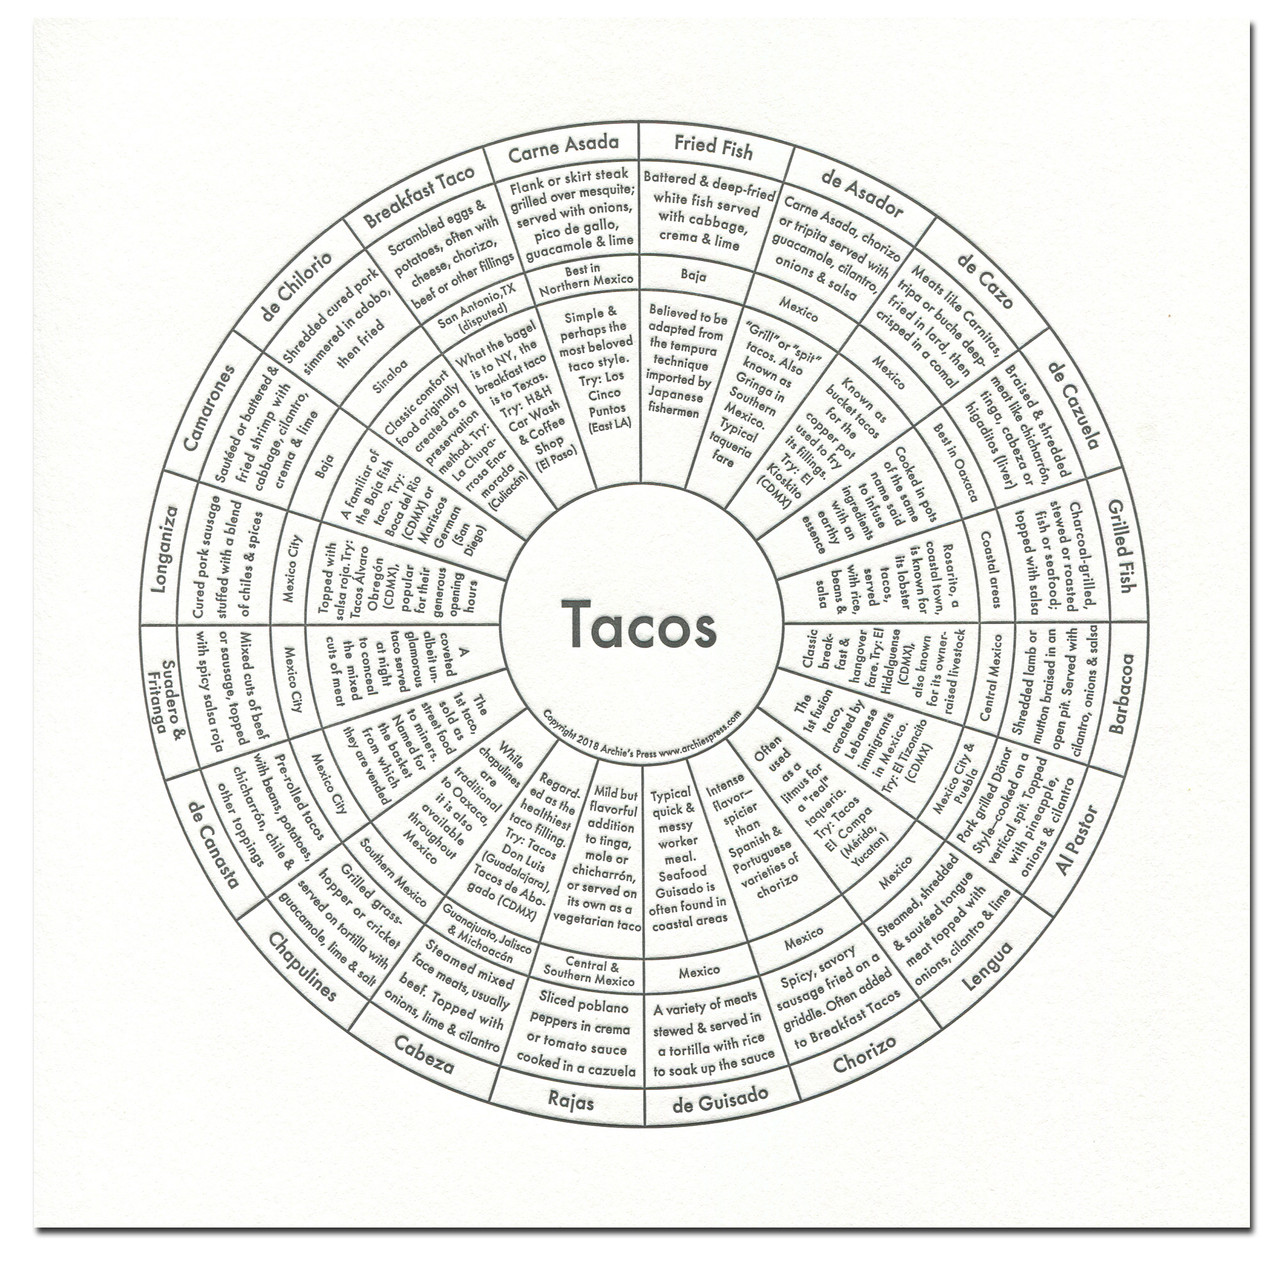 Tacos chart with 20 types of tacos, their origins and ingredients